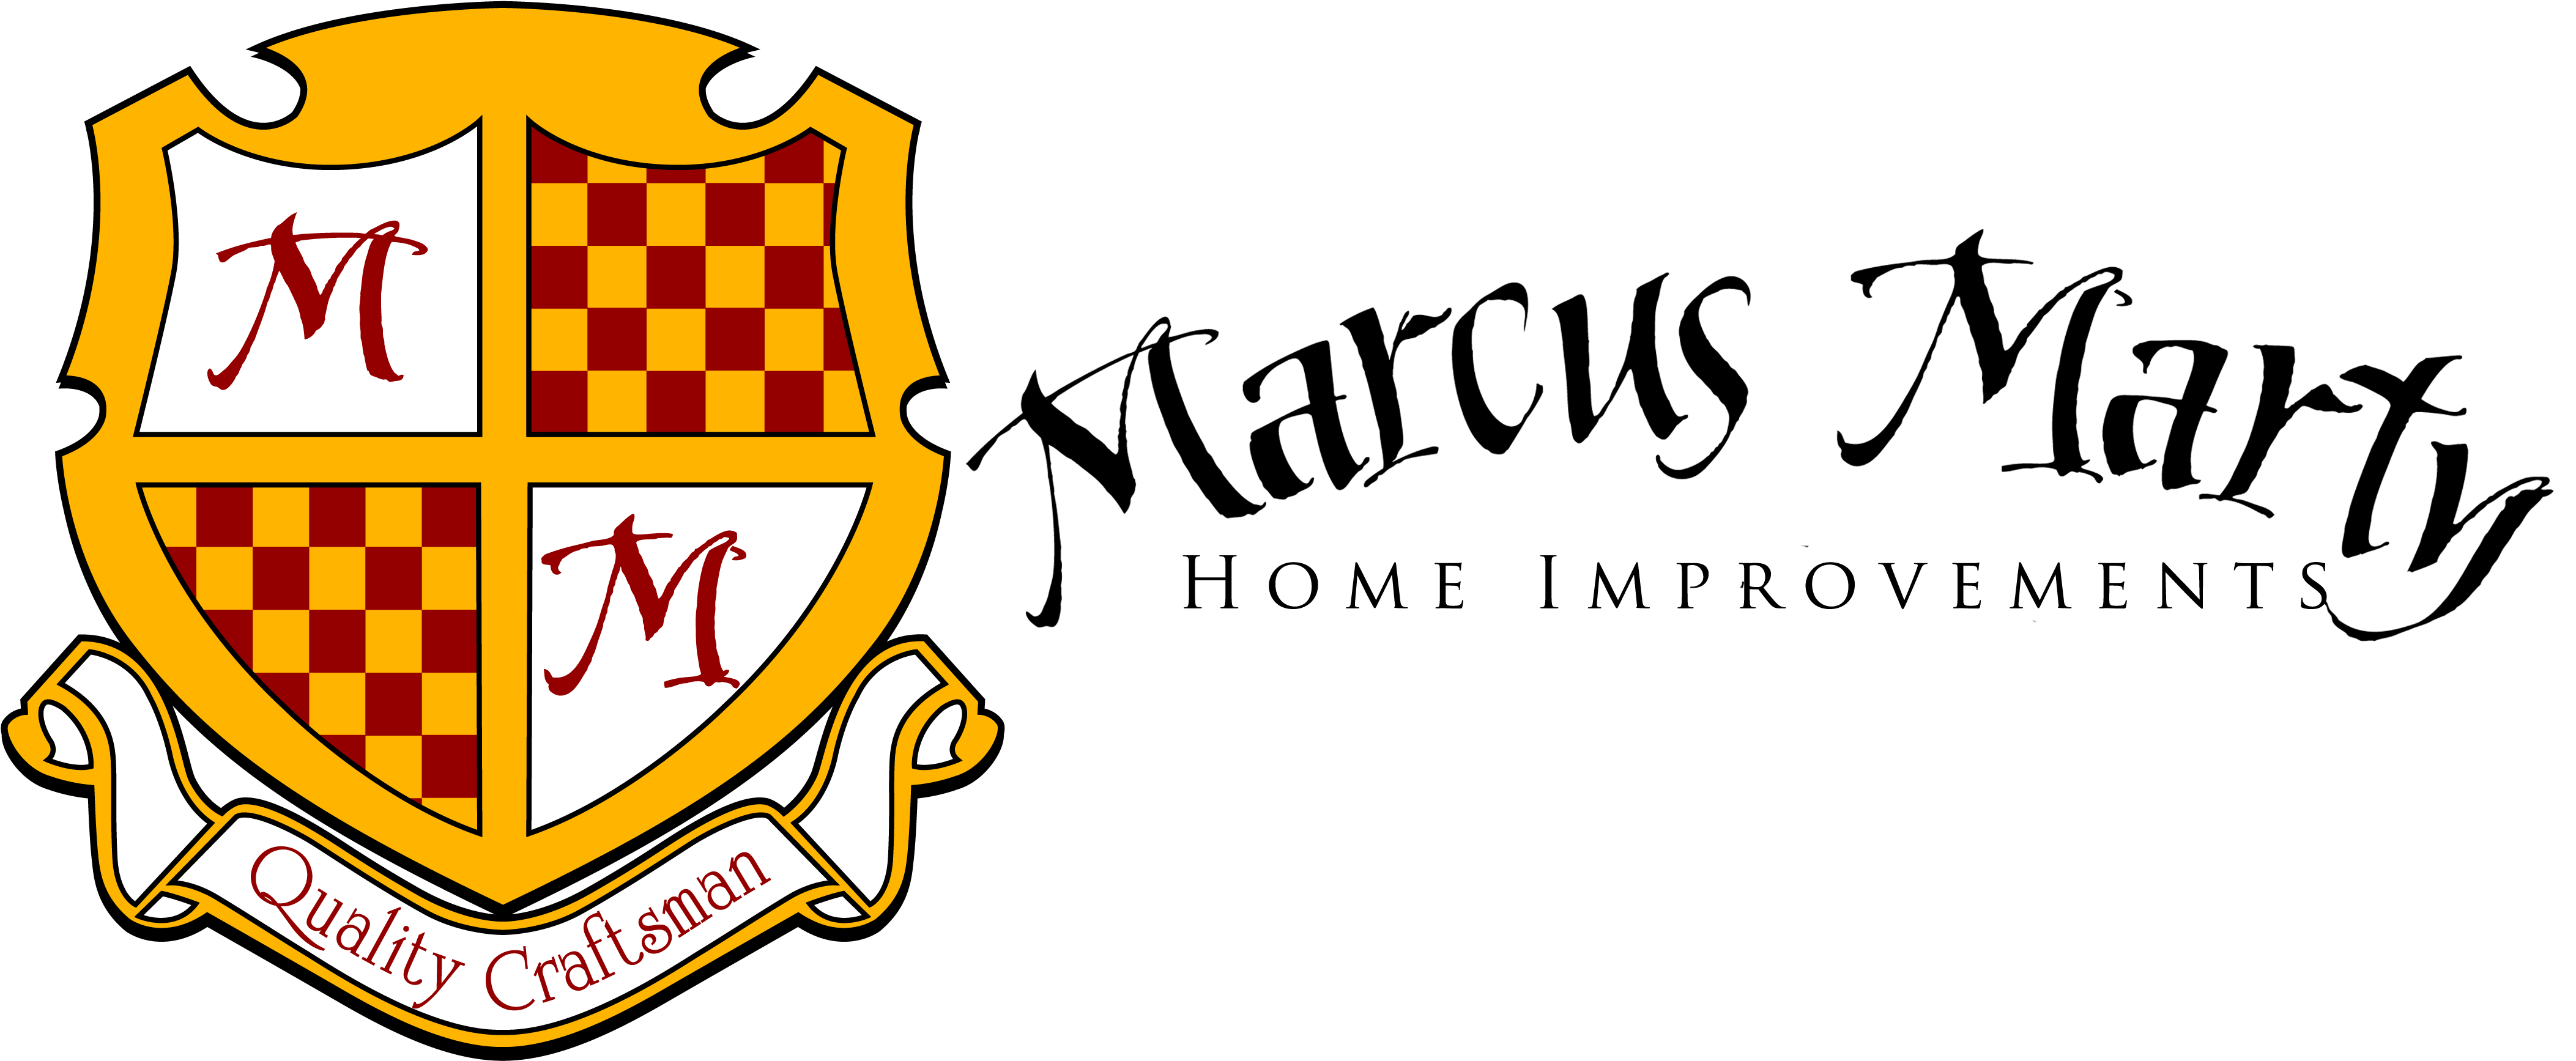 Marcus Marty Home Improvements - Marty Marcus Ceramic Tile (4290x1776)